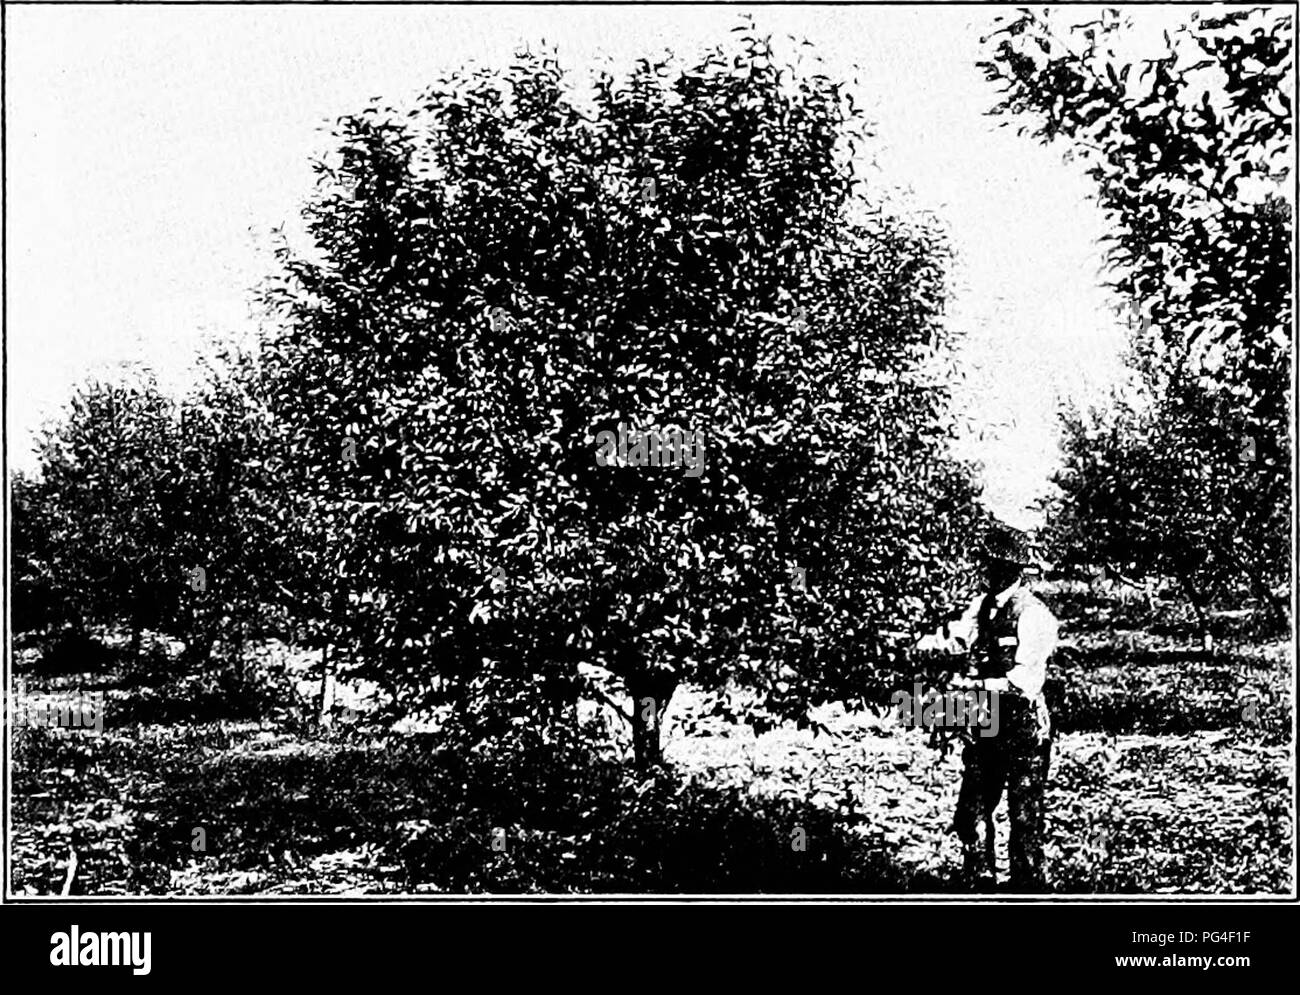 . Diseases of economic plants . Plant diseases. DRUPACEOUS FRUITS 117 $25,000. This disease is identical with that of the plum, but since the spraying mixture adheres to the fruit, it cannot be applied on to the plum without injury to the market value of the product. Spraying as for plum leaf spot with. Fig. 51. — Cherry tree from same orchard sprayed with self-boiled lime-sulphur to control leaf spot. After Scott. such modifications as are needed to avoid spotting the fruit is the only recourse. Recent experiments by Scott' showed that the self-boiled lime-sulphur wash (10-10-50), the factory Stock Photo